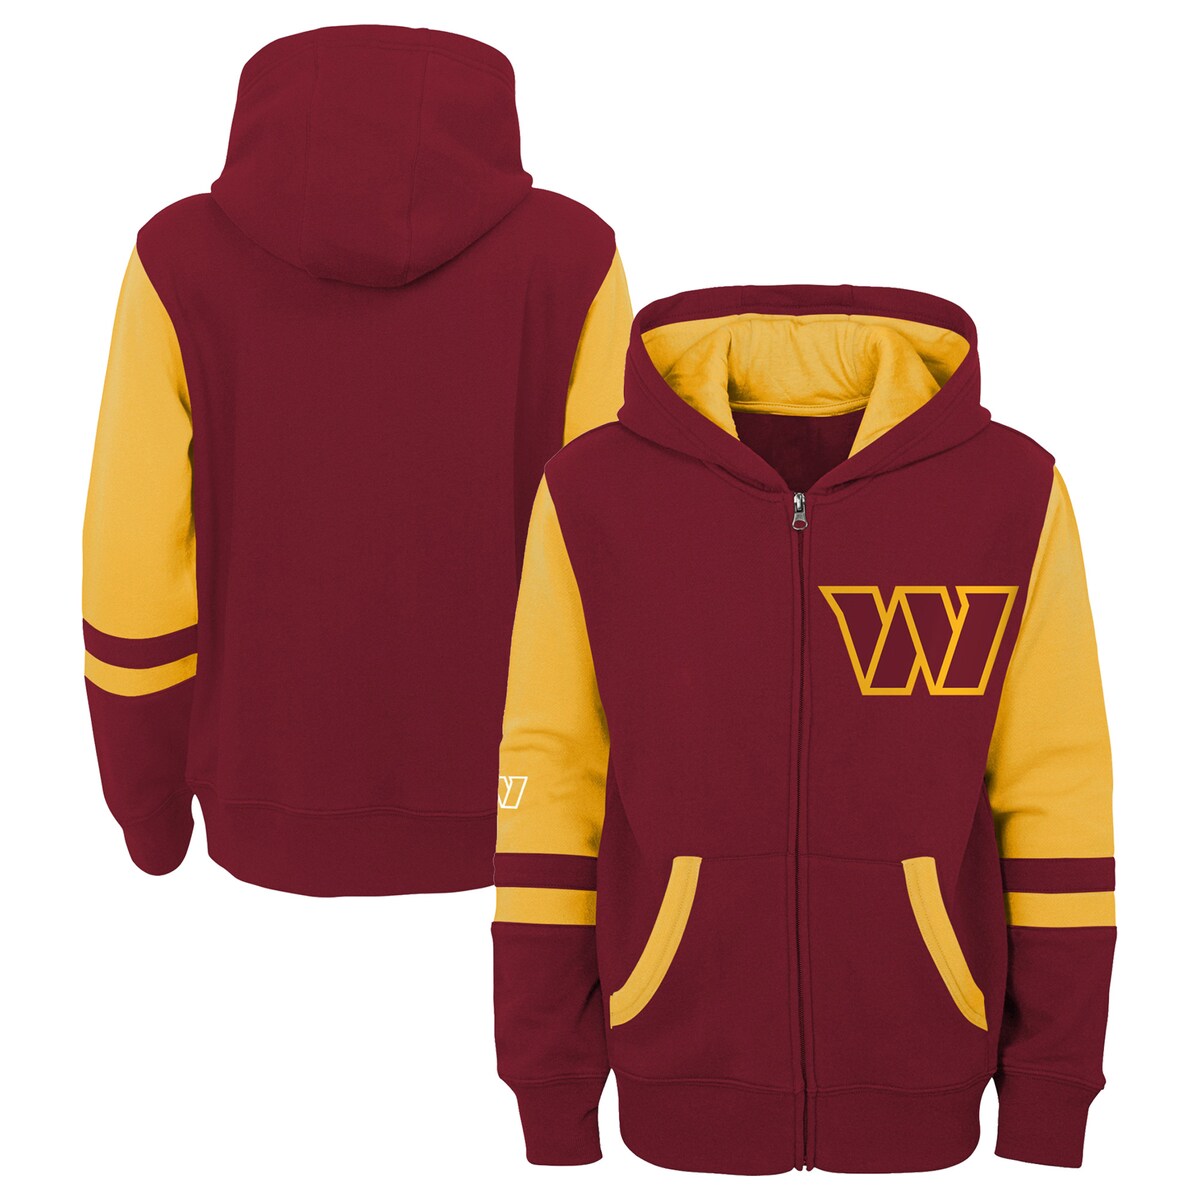 Highlight your young fan's budding dedication to the Washington Commanders with this Stadium full-zip hoodie. It feature...